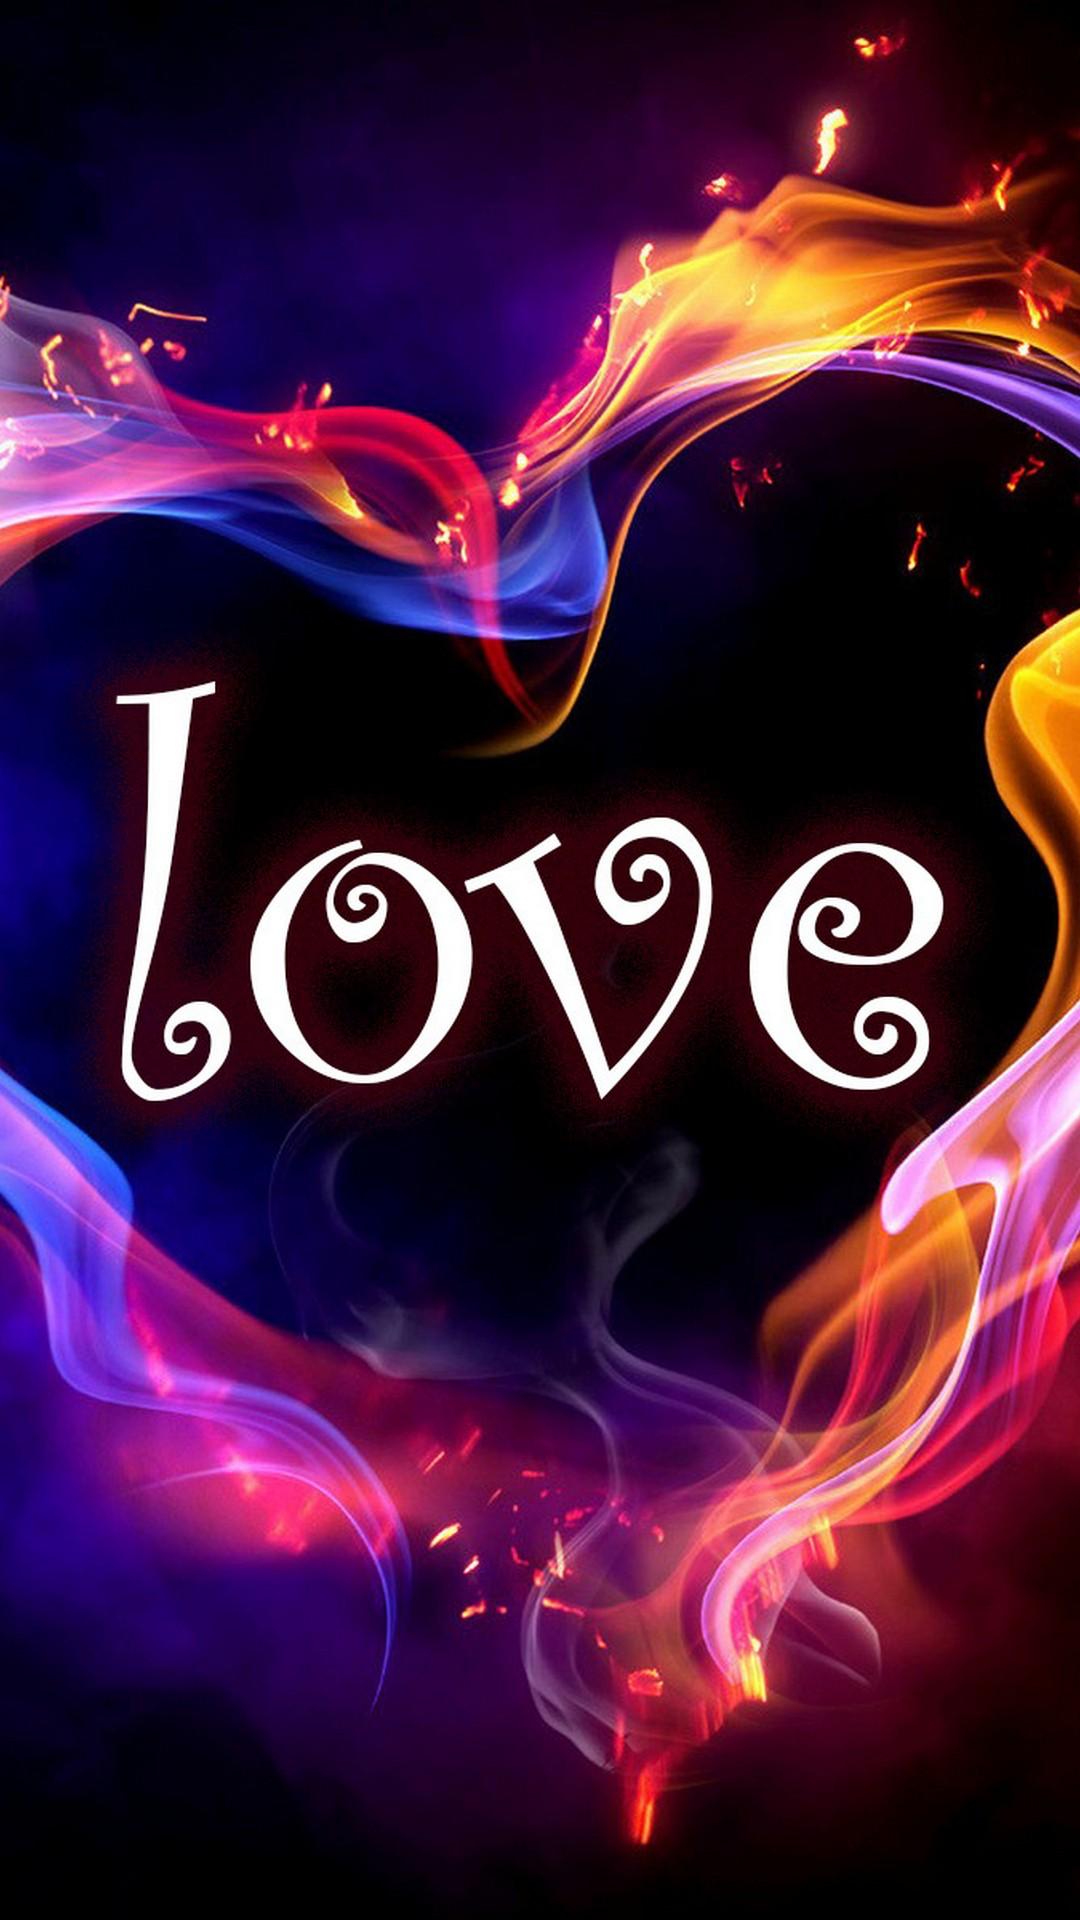 Love HD Android Wallpapers - Wallpaper Cave